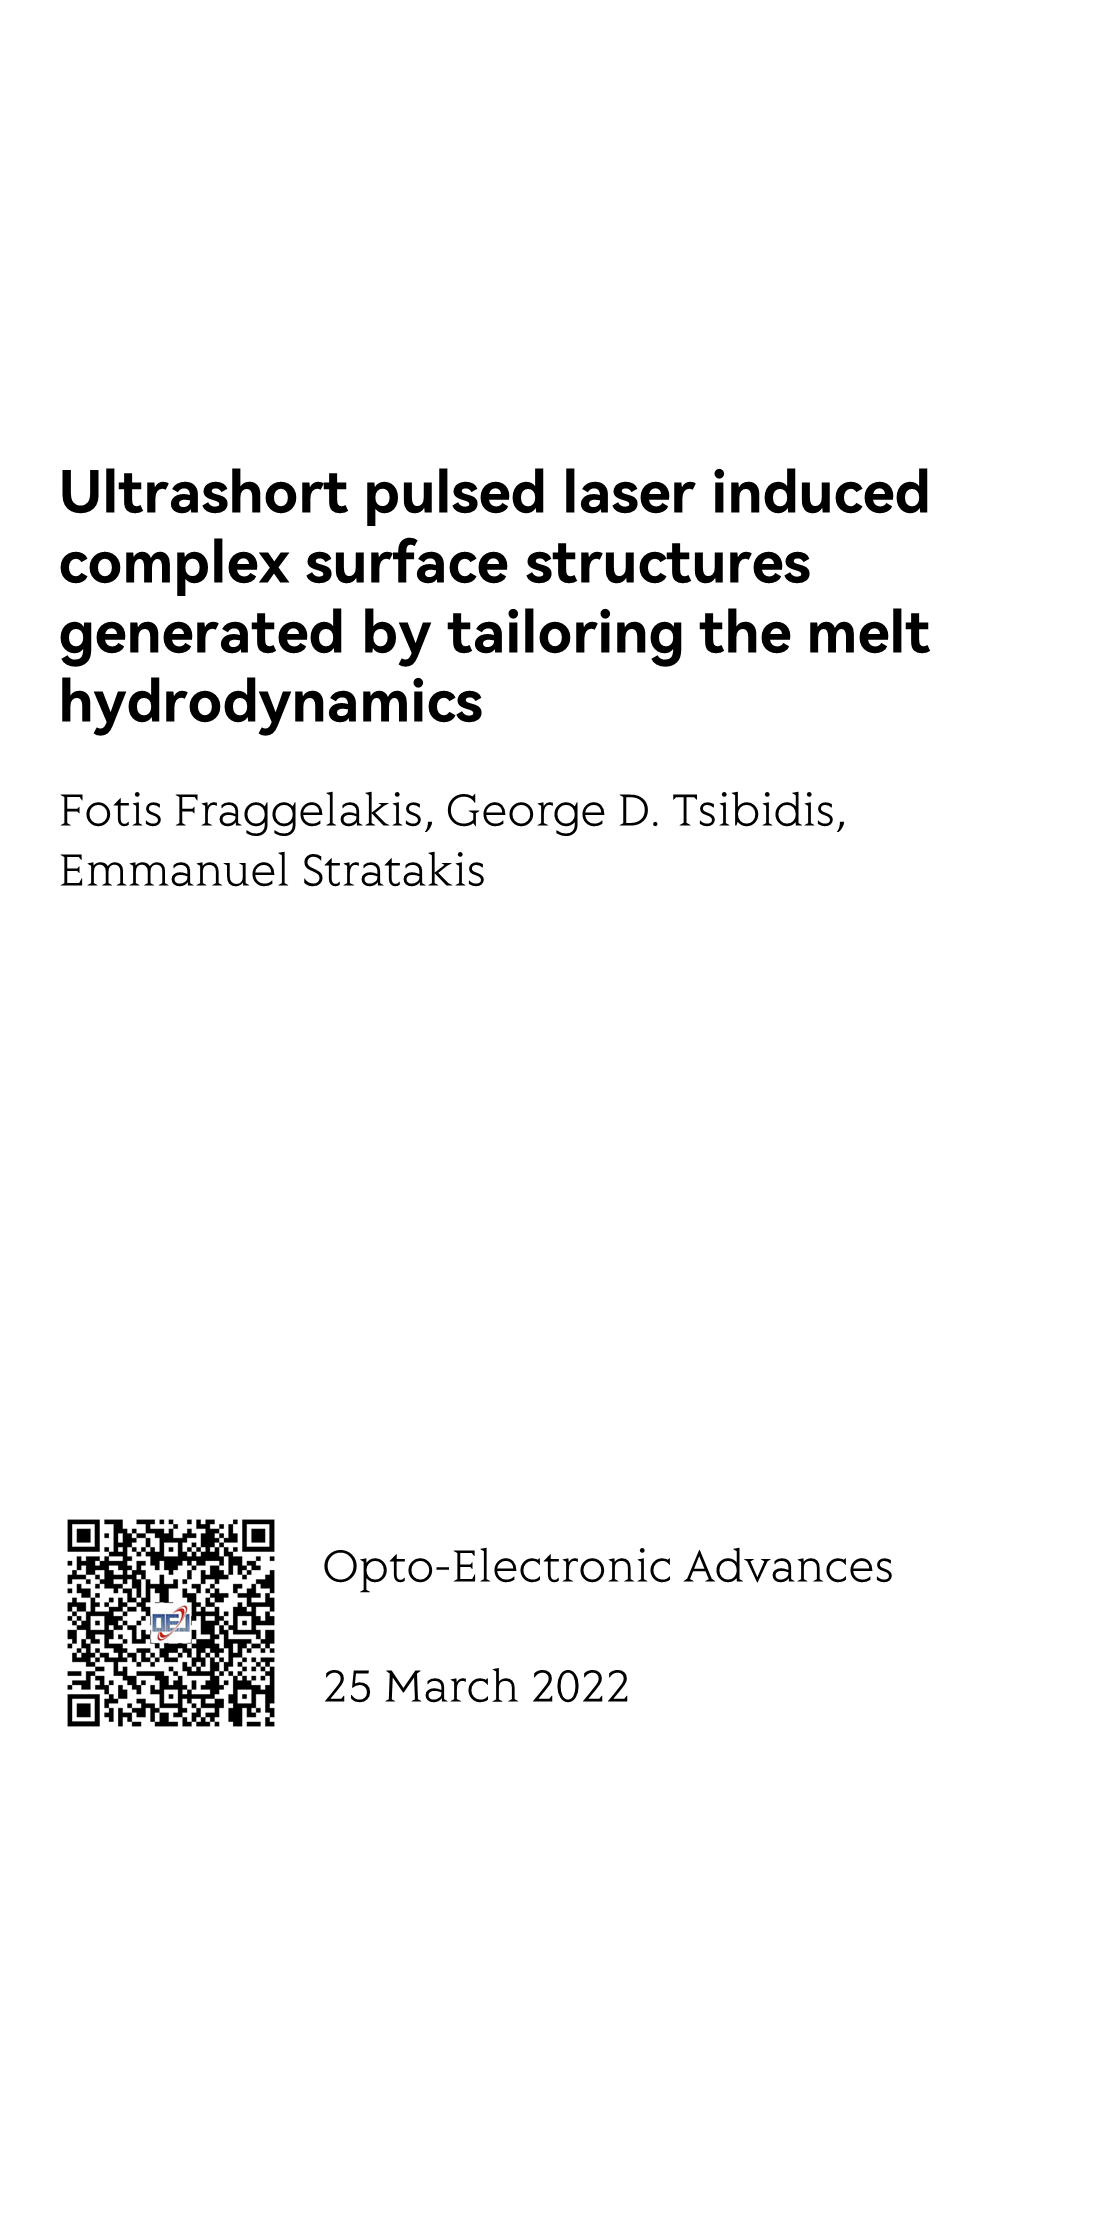 Ultrashort pulsed laser induced complex surface structures generated by tailoring the melt hydrodynamics_1